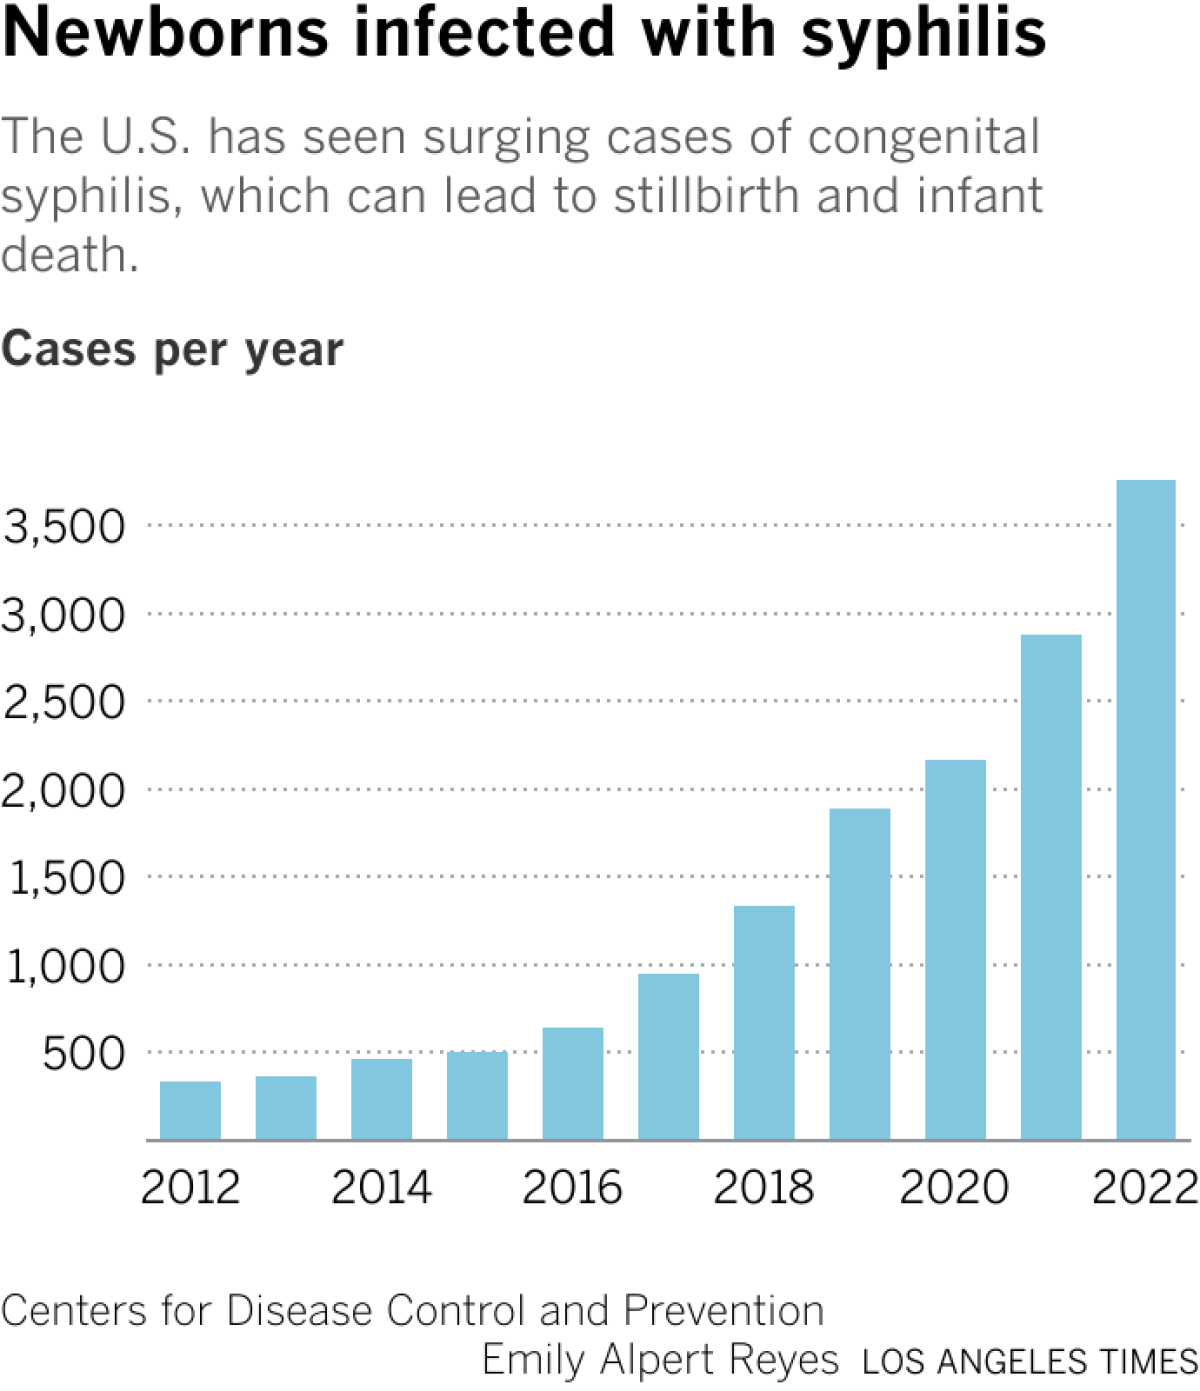 The number of cases of congenital syphilis rose from 335 to 3761 between 2012 and 2022.